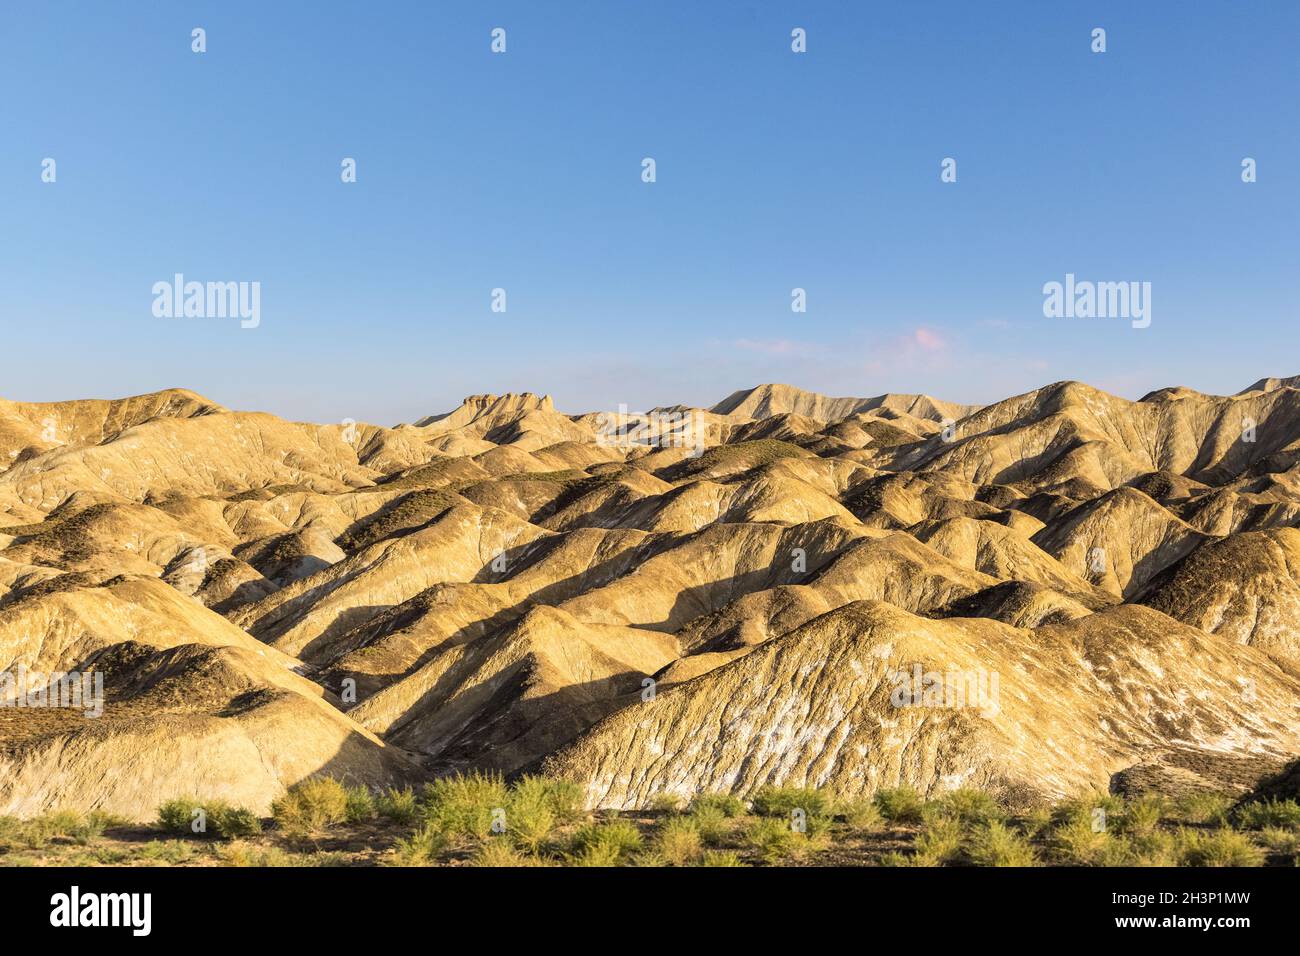 Beautiful hilly landscape at dusk in zhangye Stock Photo